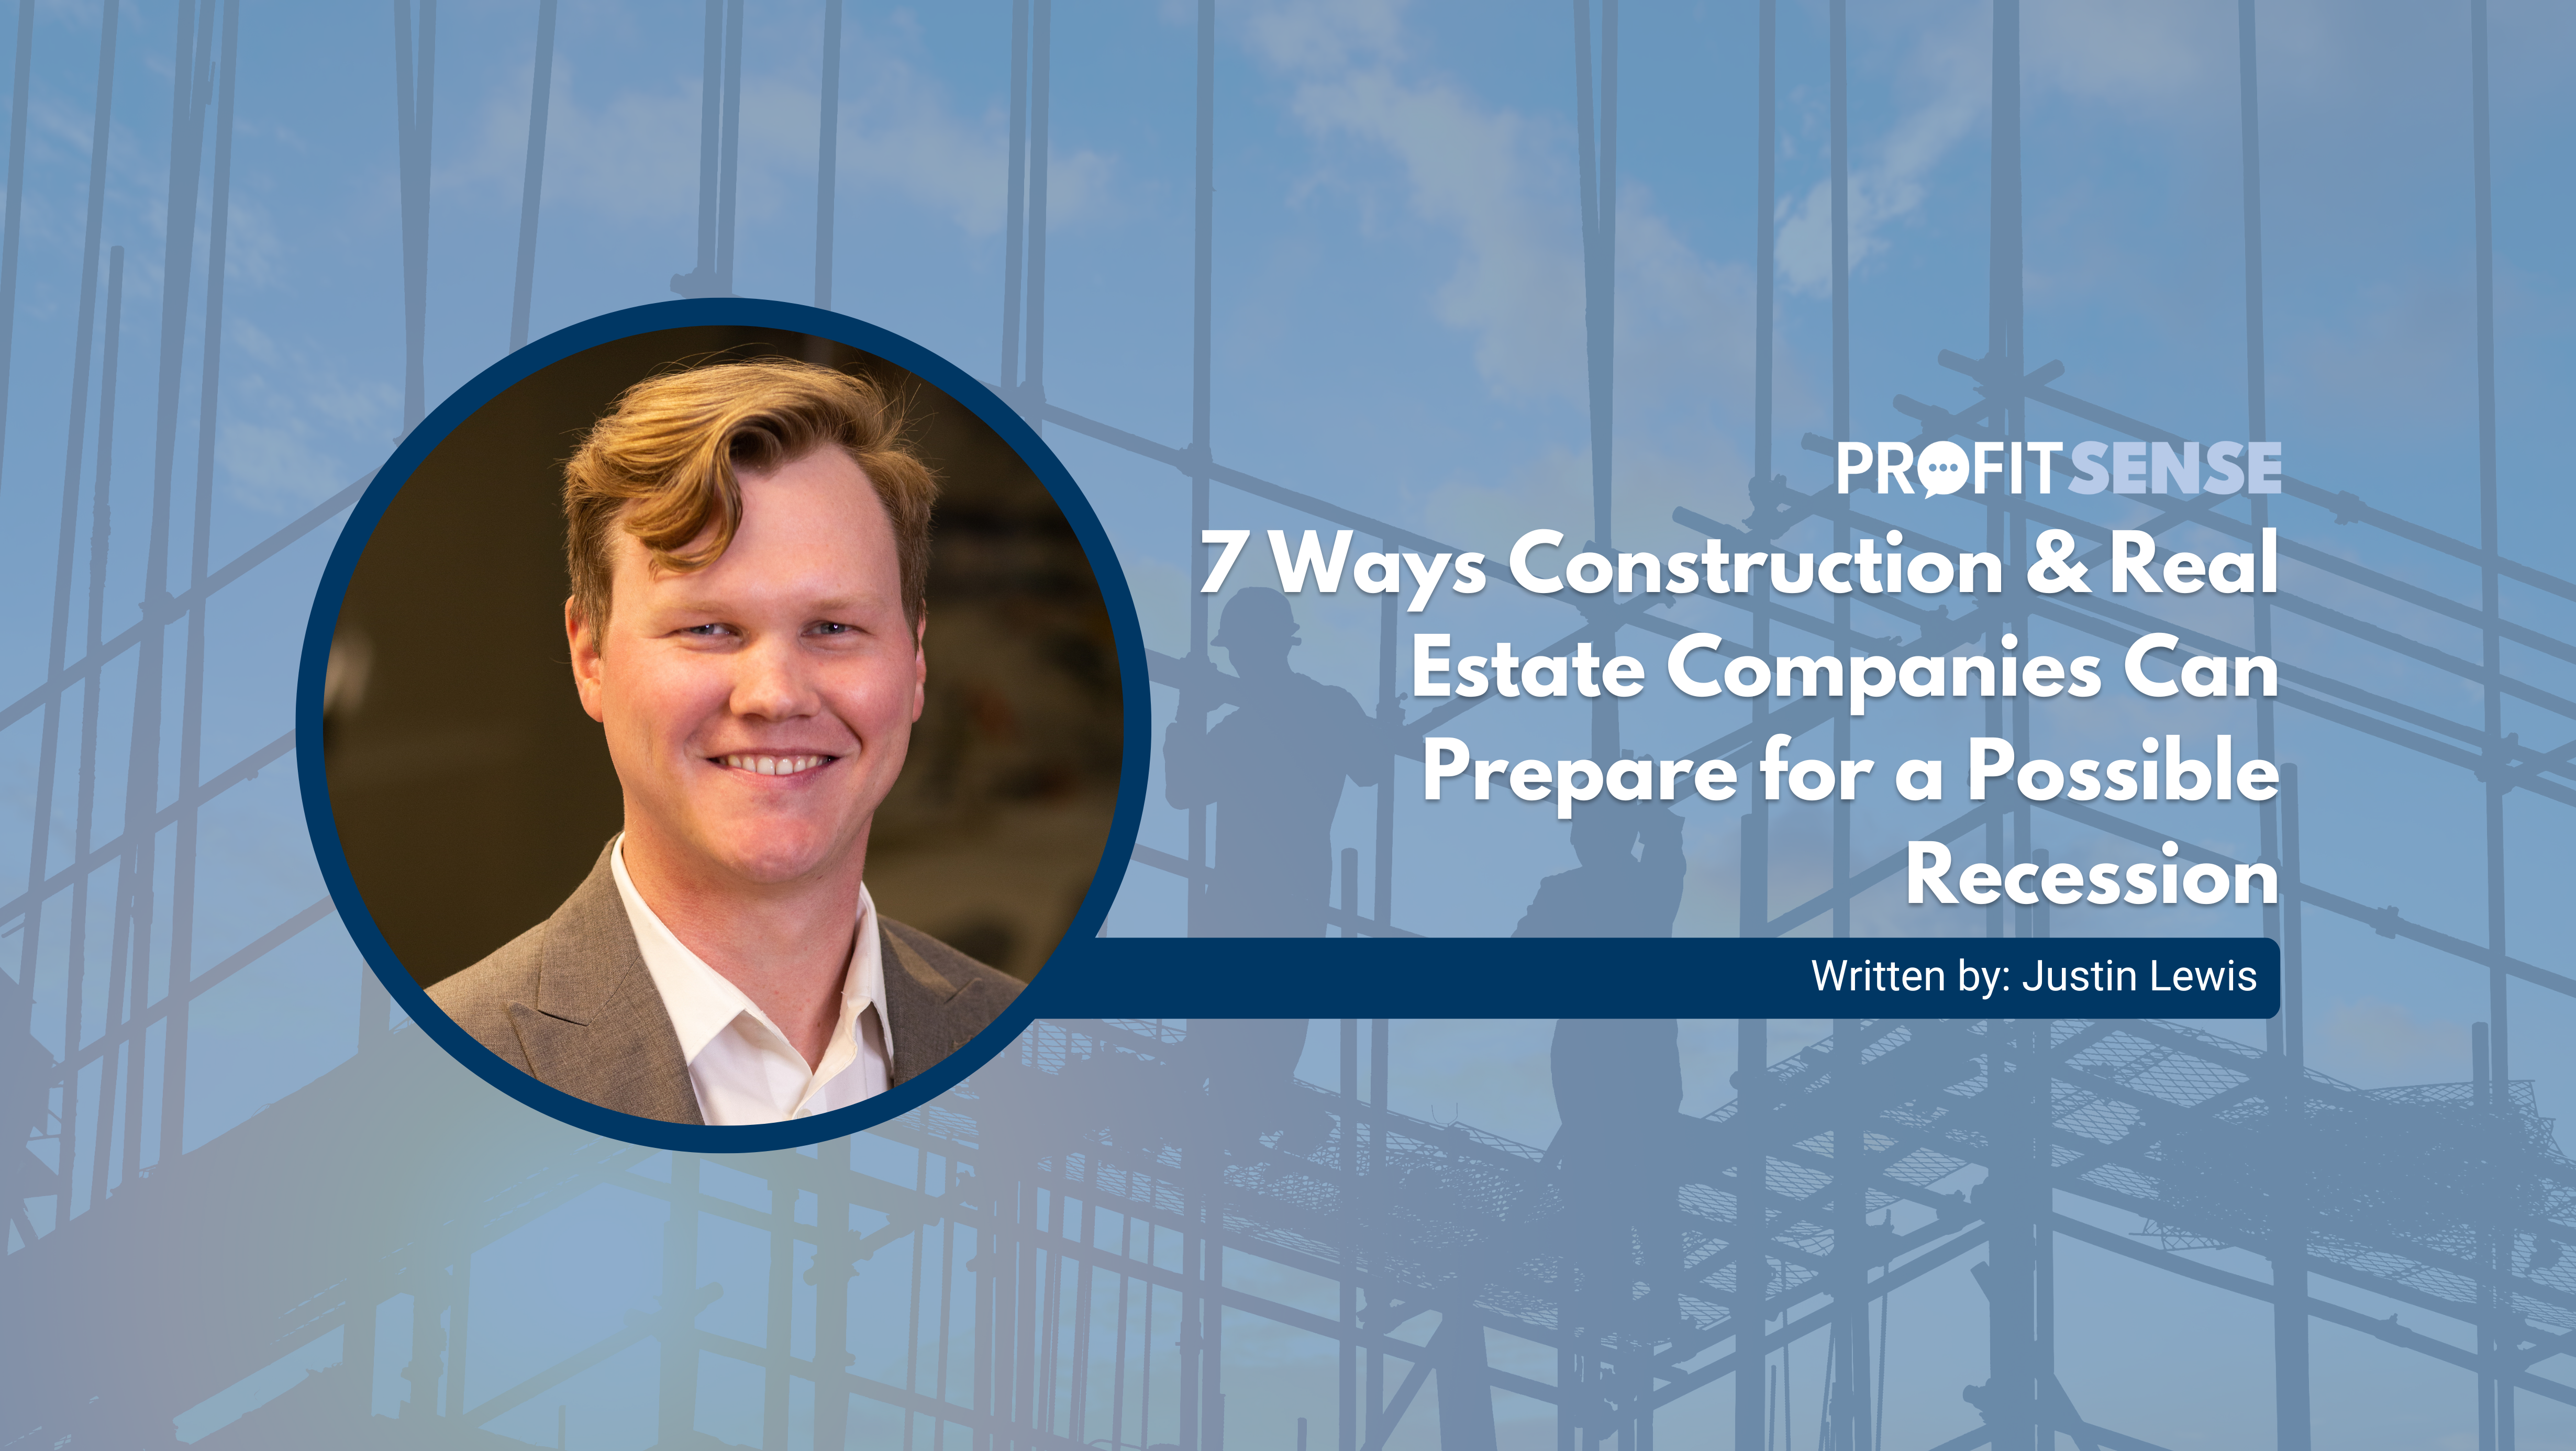 7 Ways Construction & Real Estate Companies Can Prepare for a Possible Recession